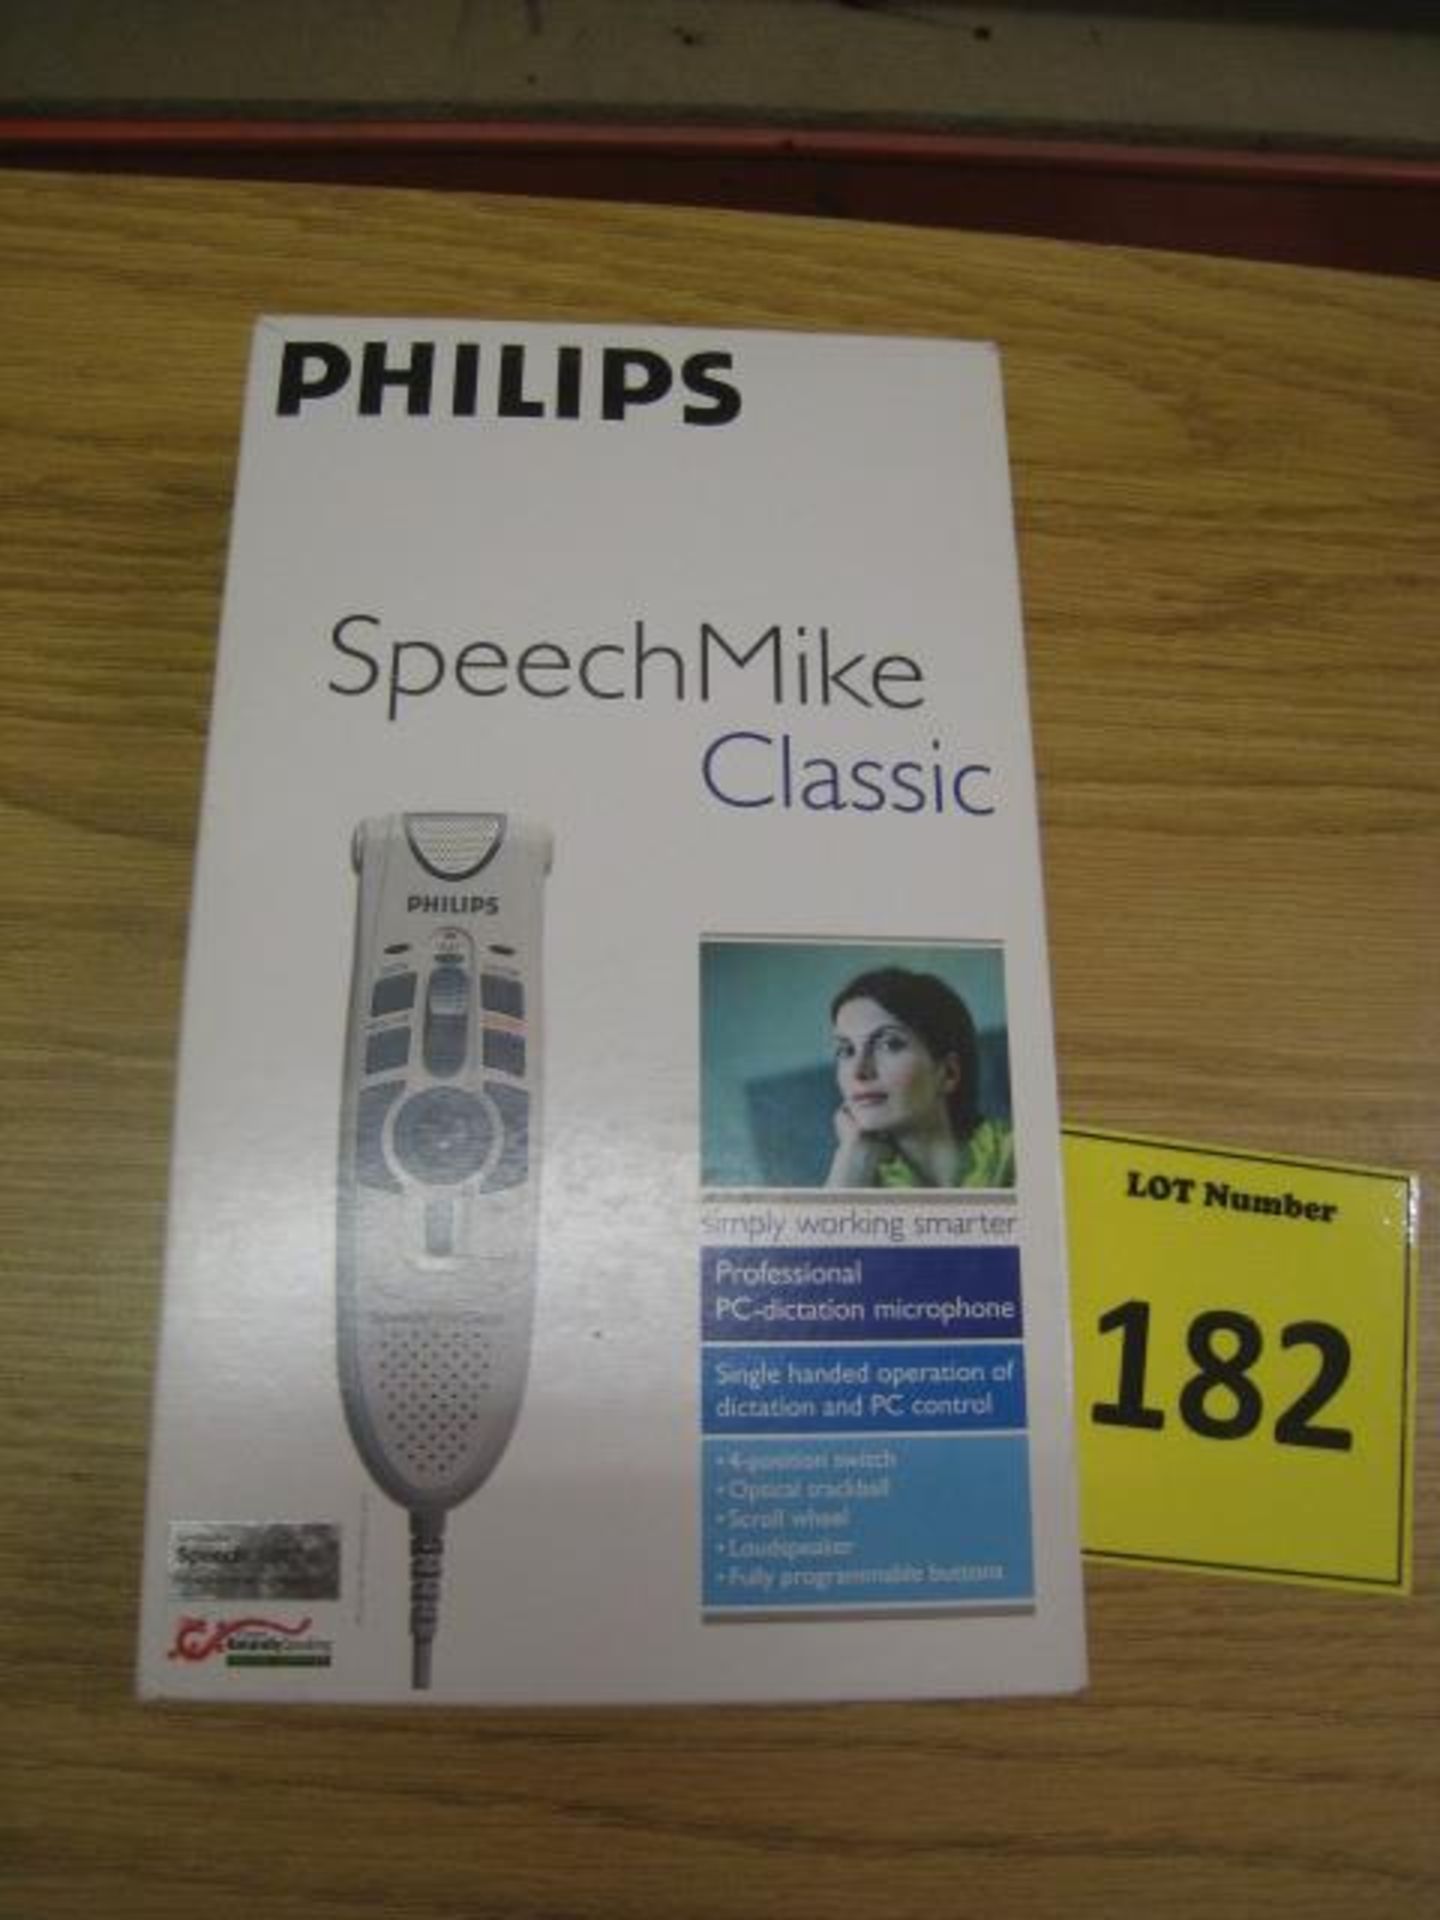 NEW & BOXED PHILLIPS SPEECH MIKE CLASSIC PROFESSIONAL PC DICTATION MICROPHONE. MODEL LFH5260/00